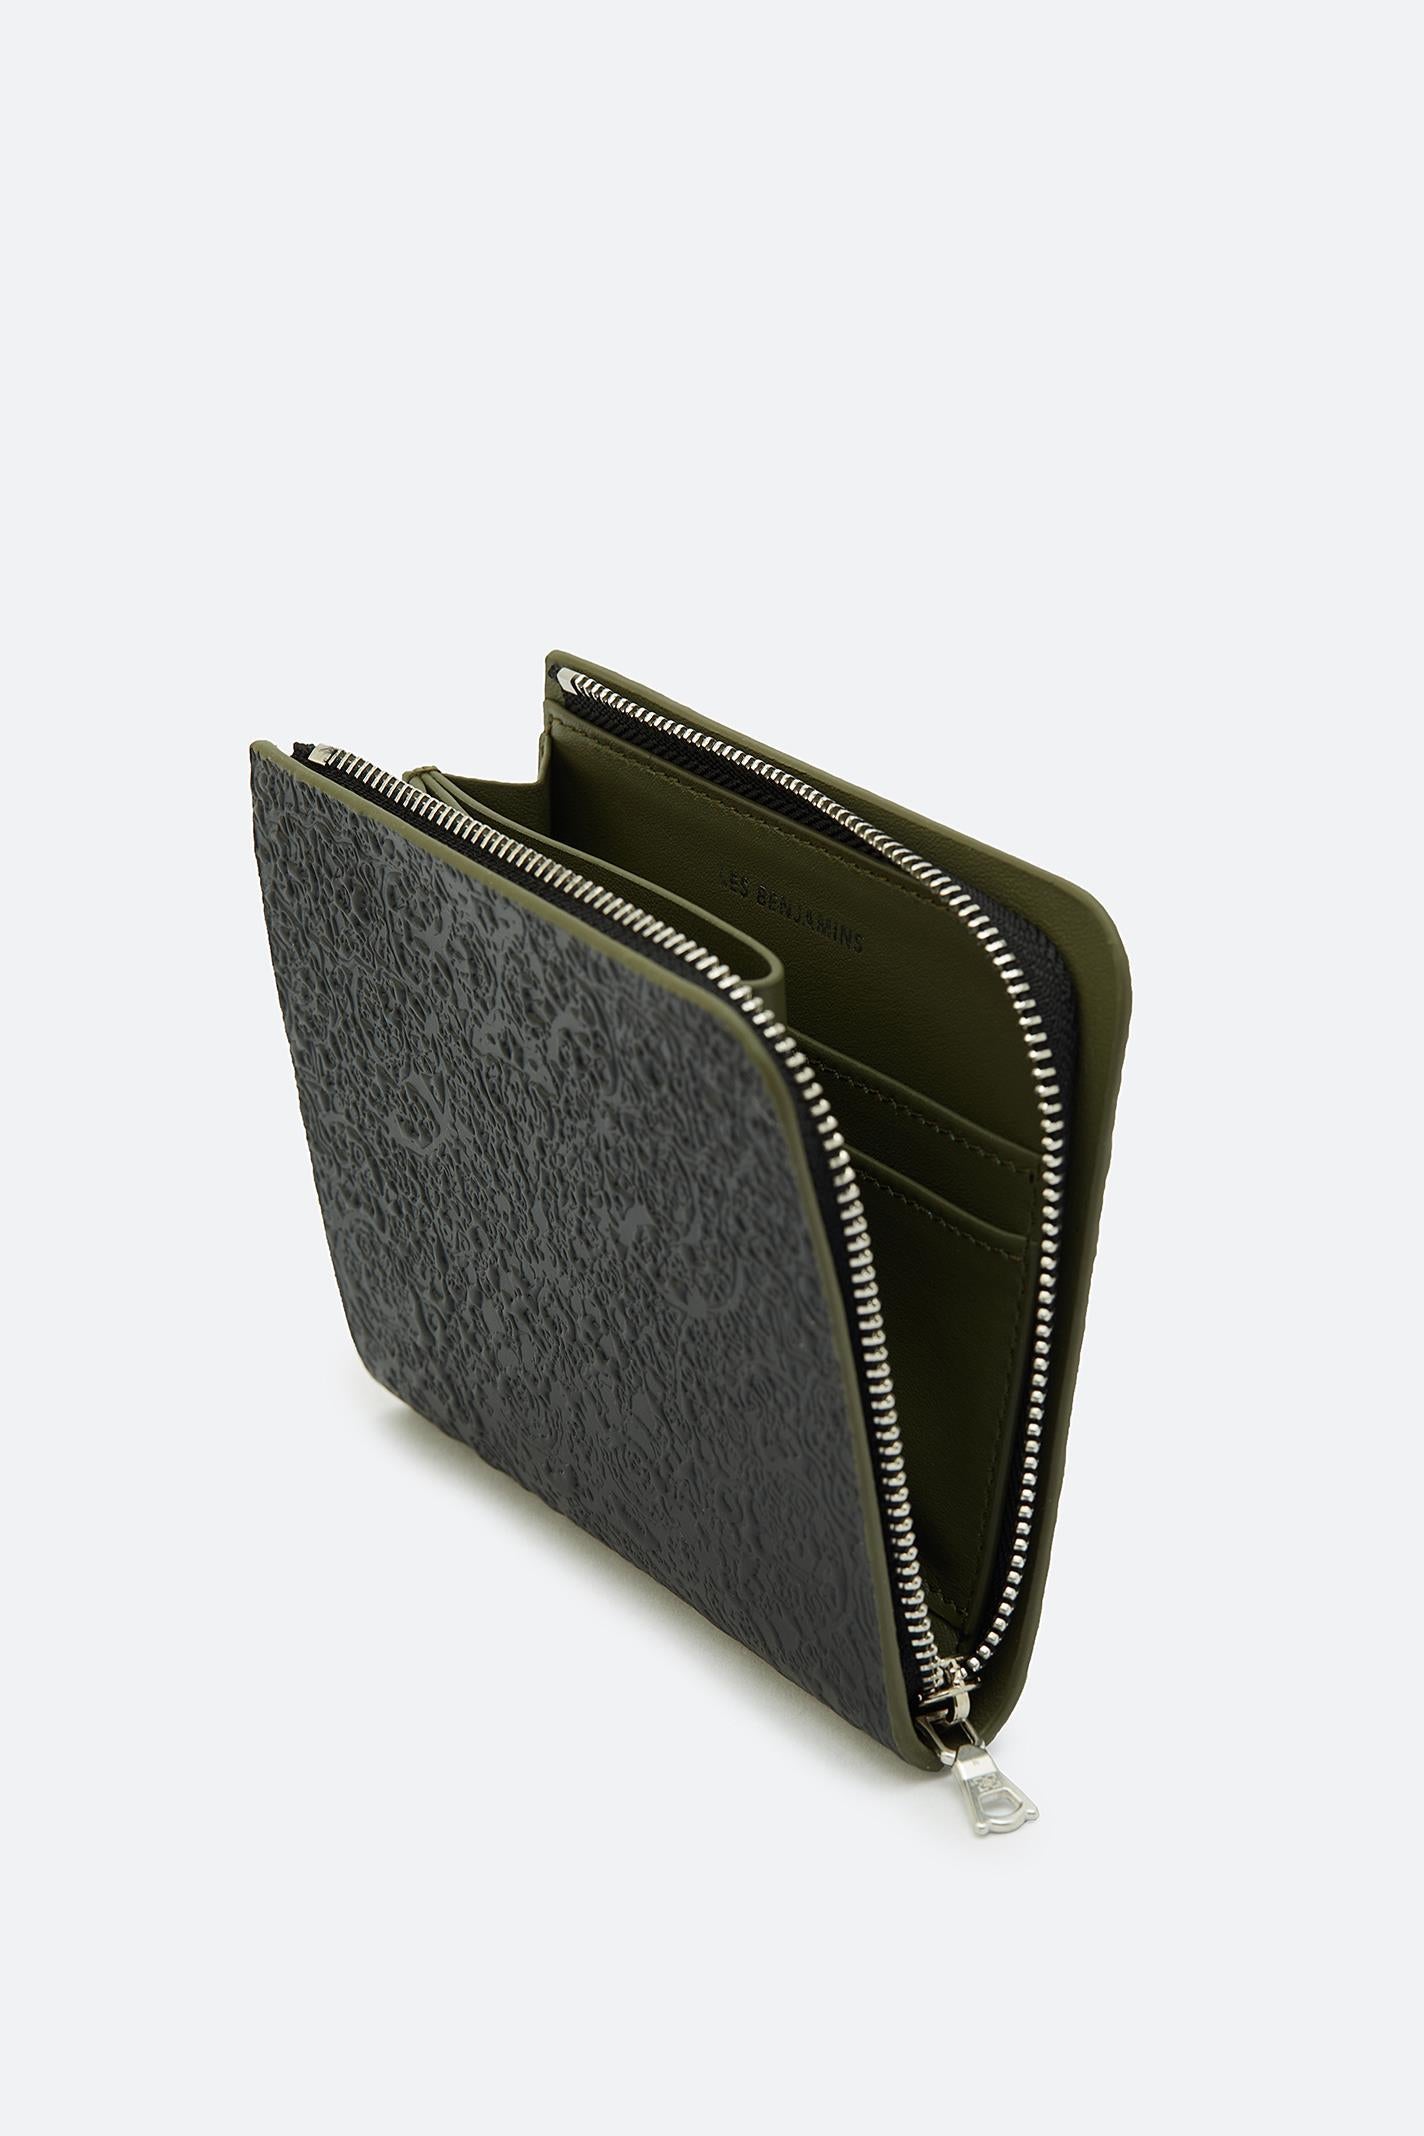 EMBOSSED LARGE ZIPPED WALLET 067 